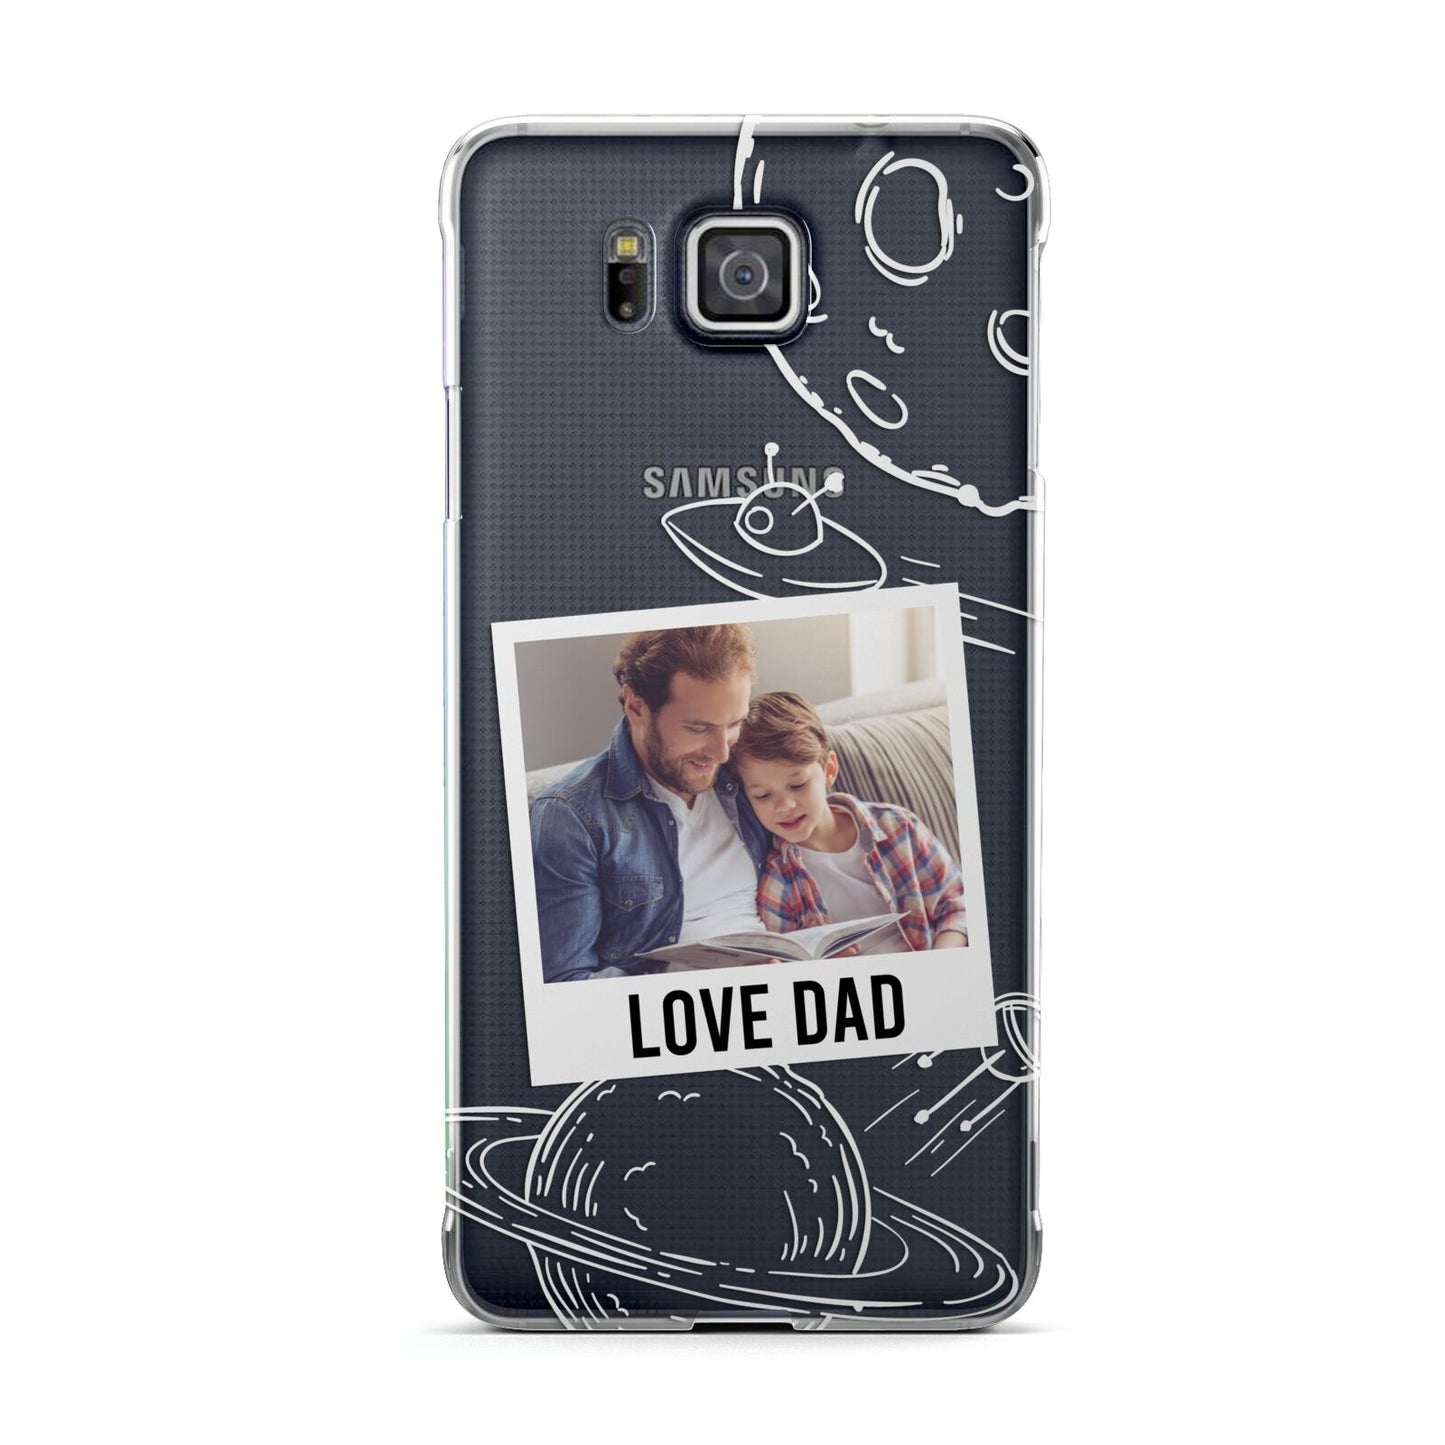 Personalised From Dad Photo Samsung Galaxy Alpha Case